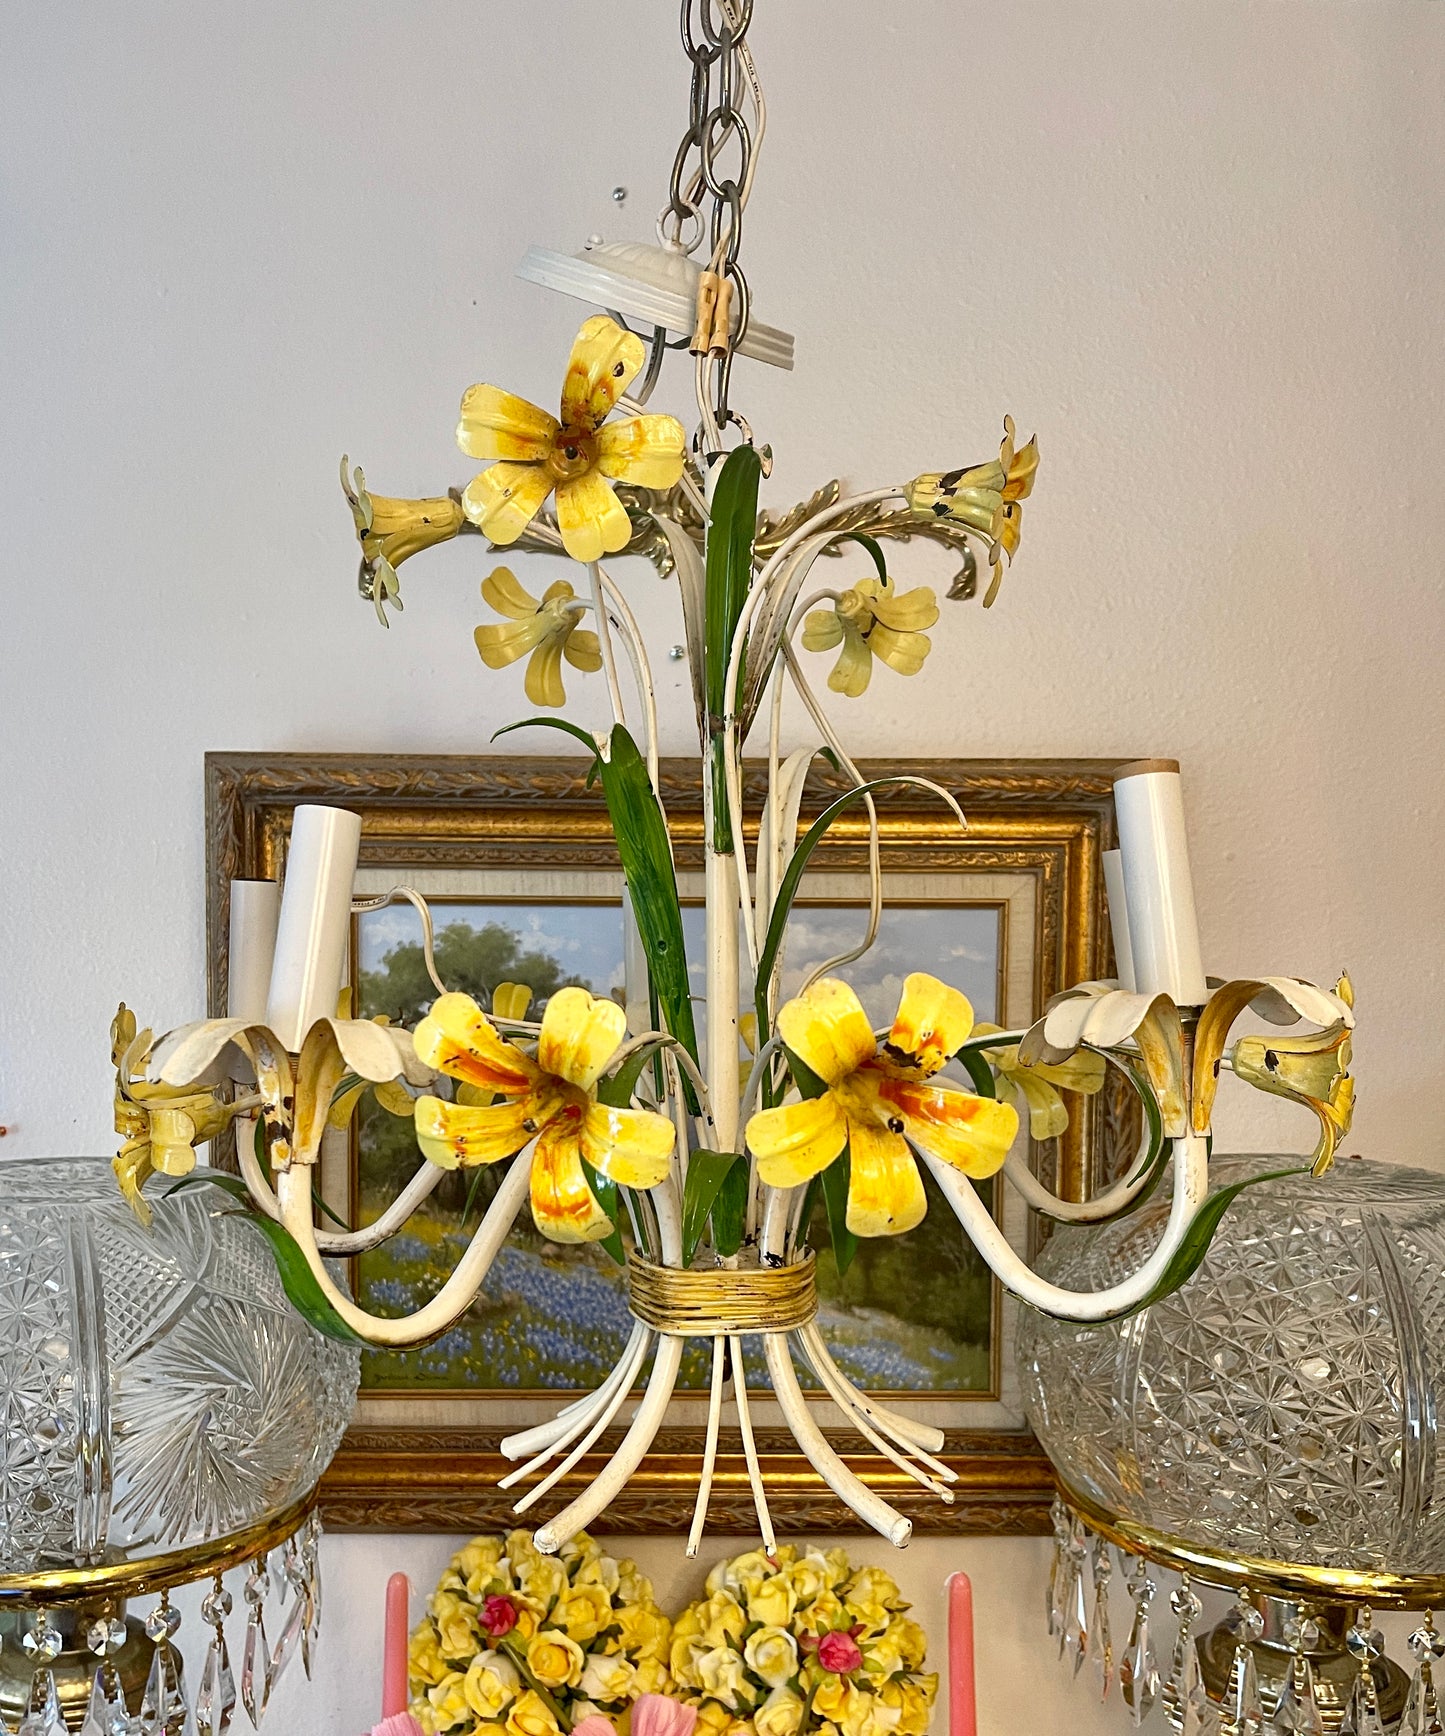 Large Vintage Tole Flower Chandelier, yellow and Orange Flowers with Wispy Green Leaves